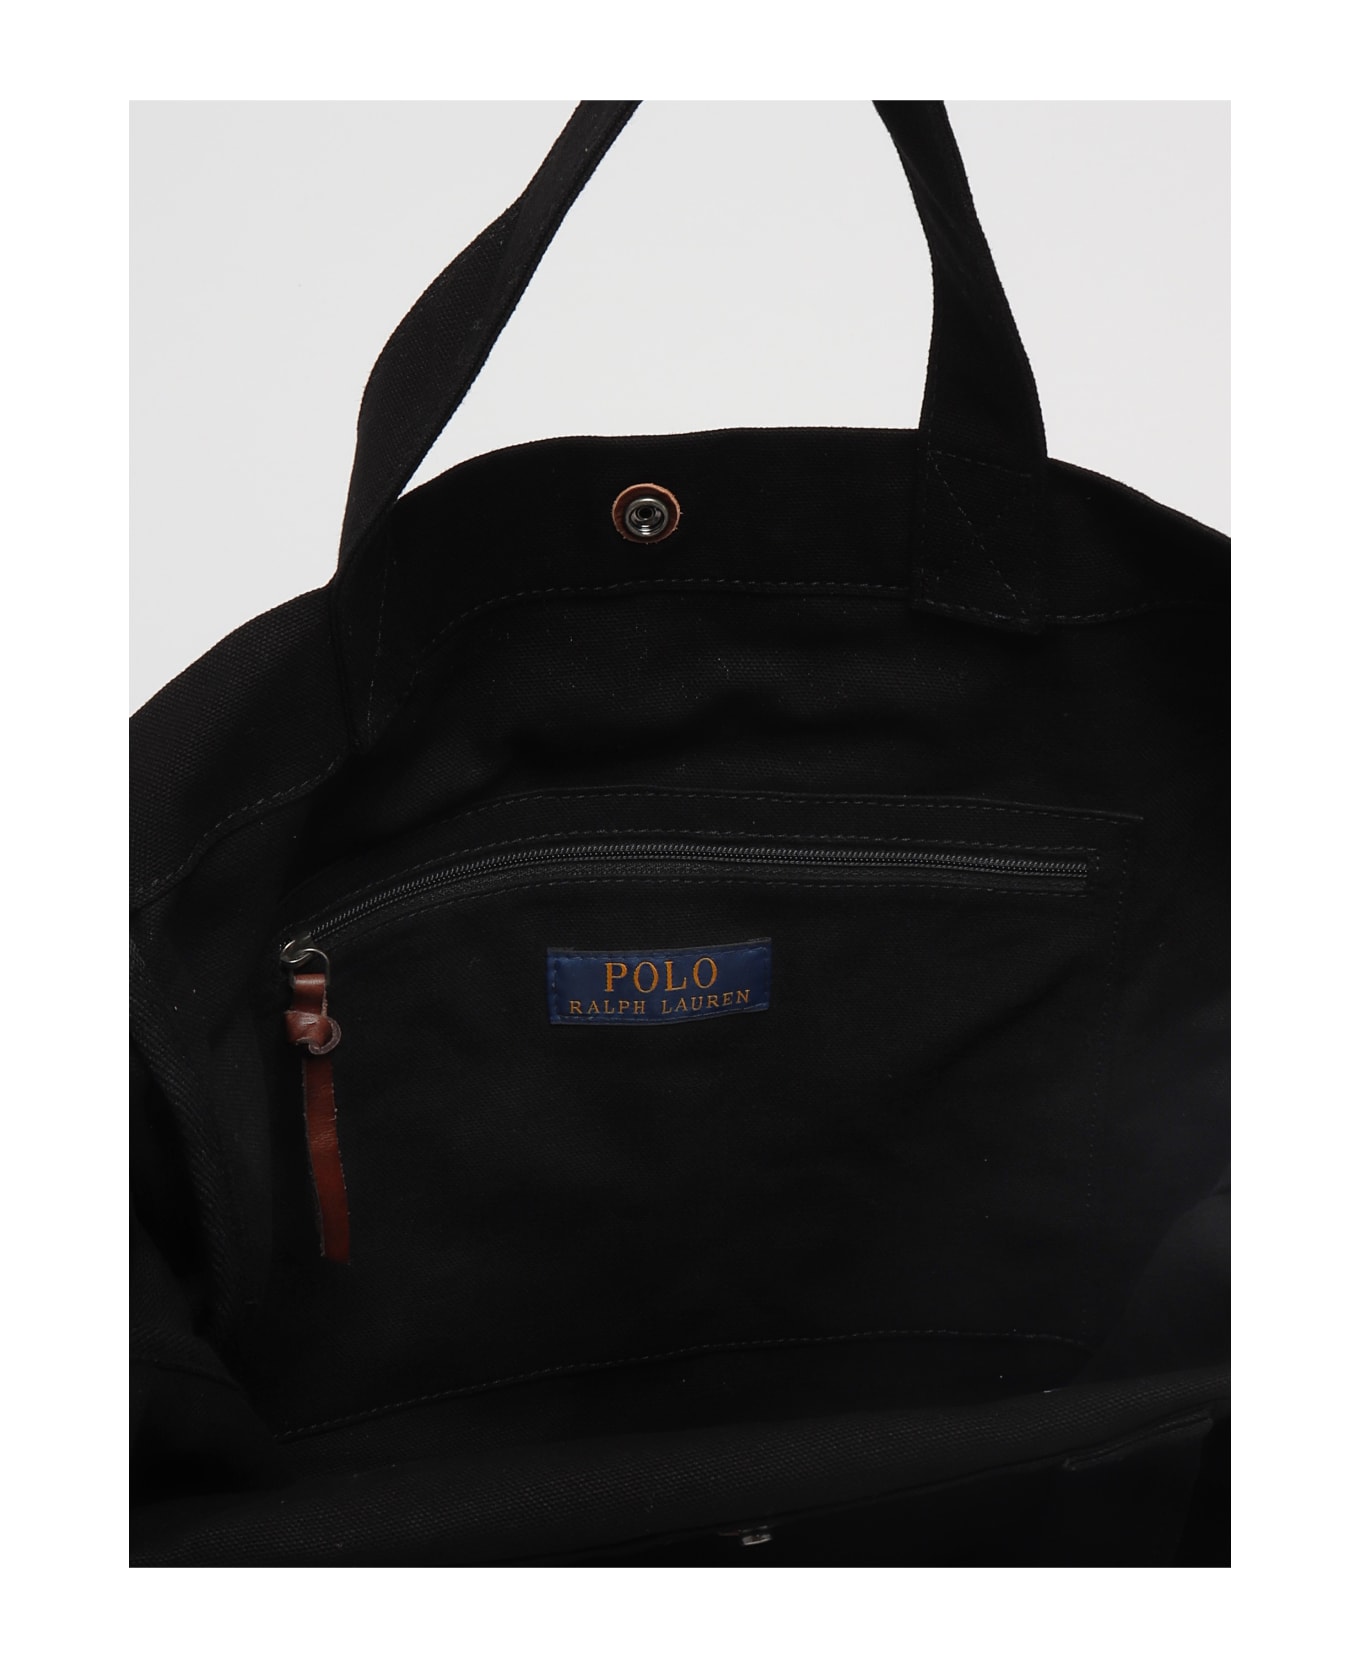 Polo Ralph Lauren Tote Large Canvas Tote - NERO トートバッグ